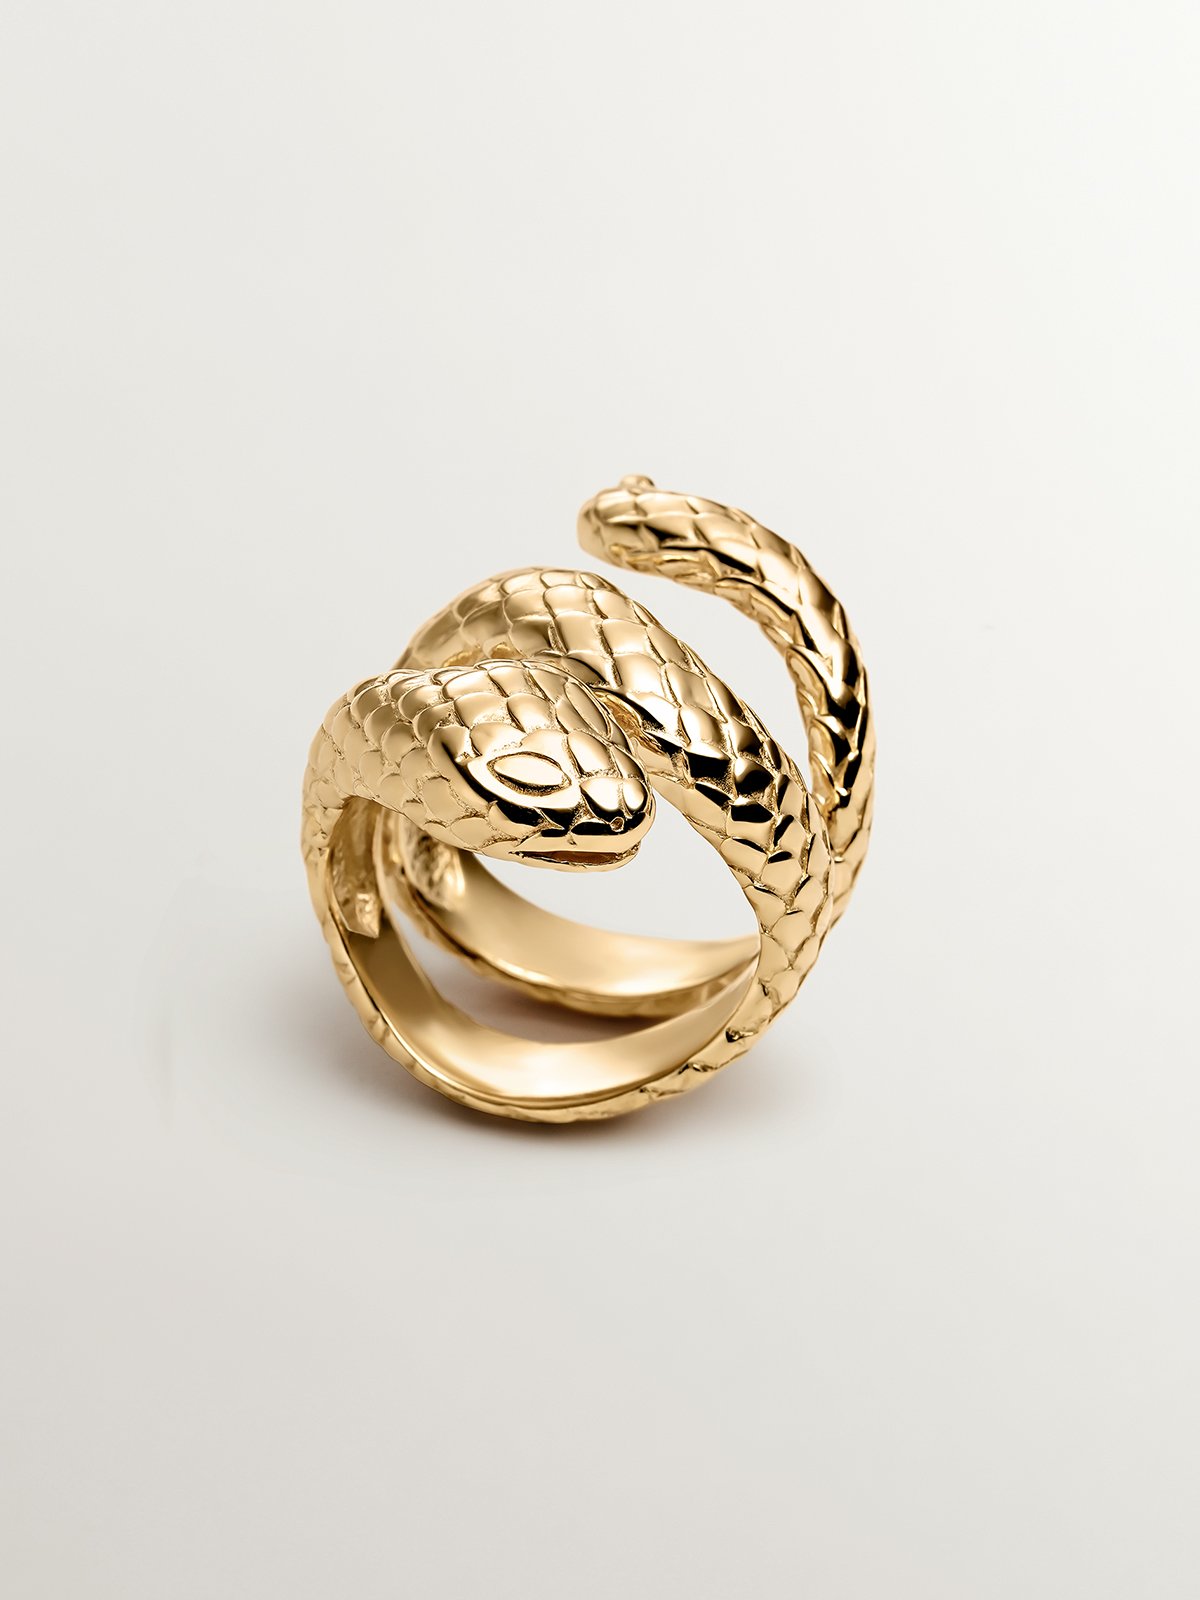 Wide 925 silver ring bathed in 18K yellow gold in the shape of a snake.